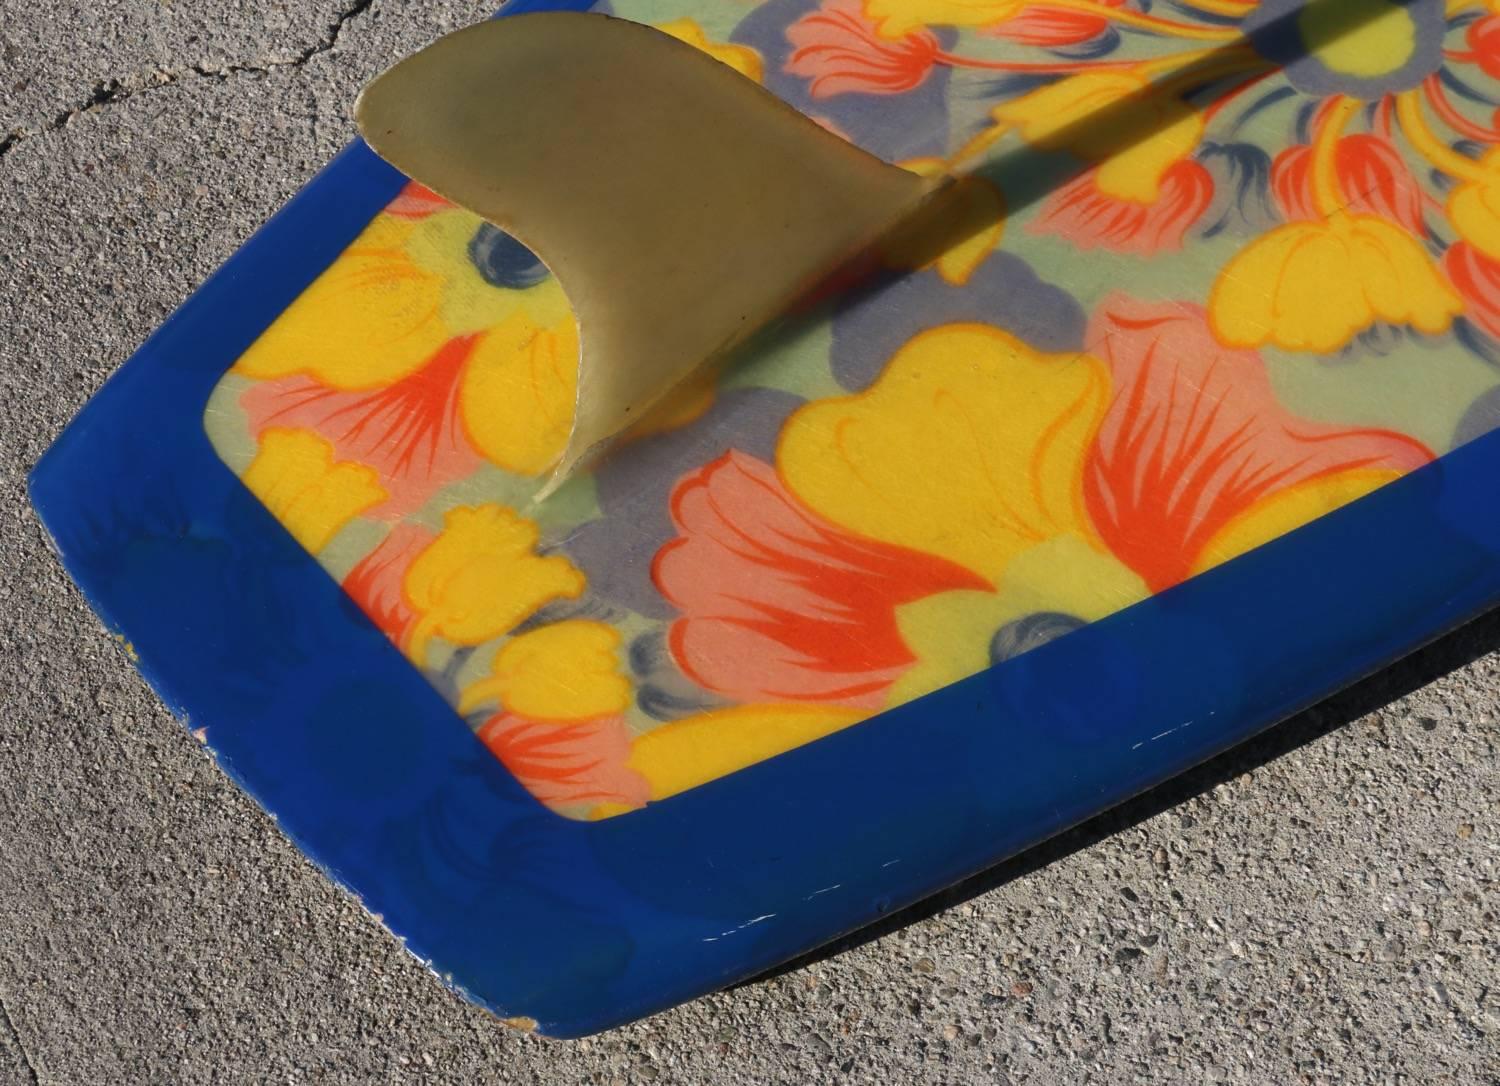 Mid-20th Century Original Red Blue Yellow Psychedelic Floral Dextra Surfboard, circa 1965